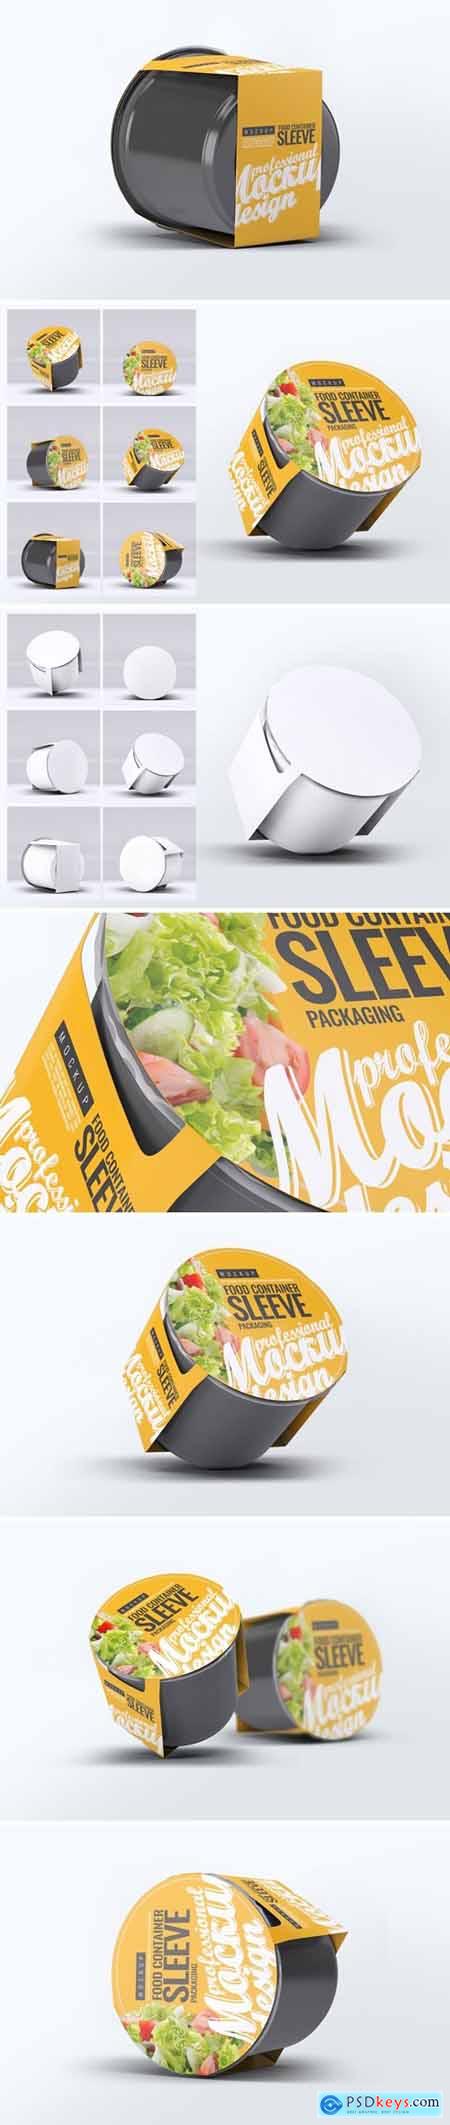 Food Container Sleeve Packaging Mock-Up v.2